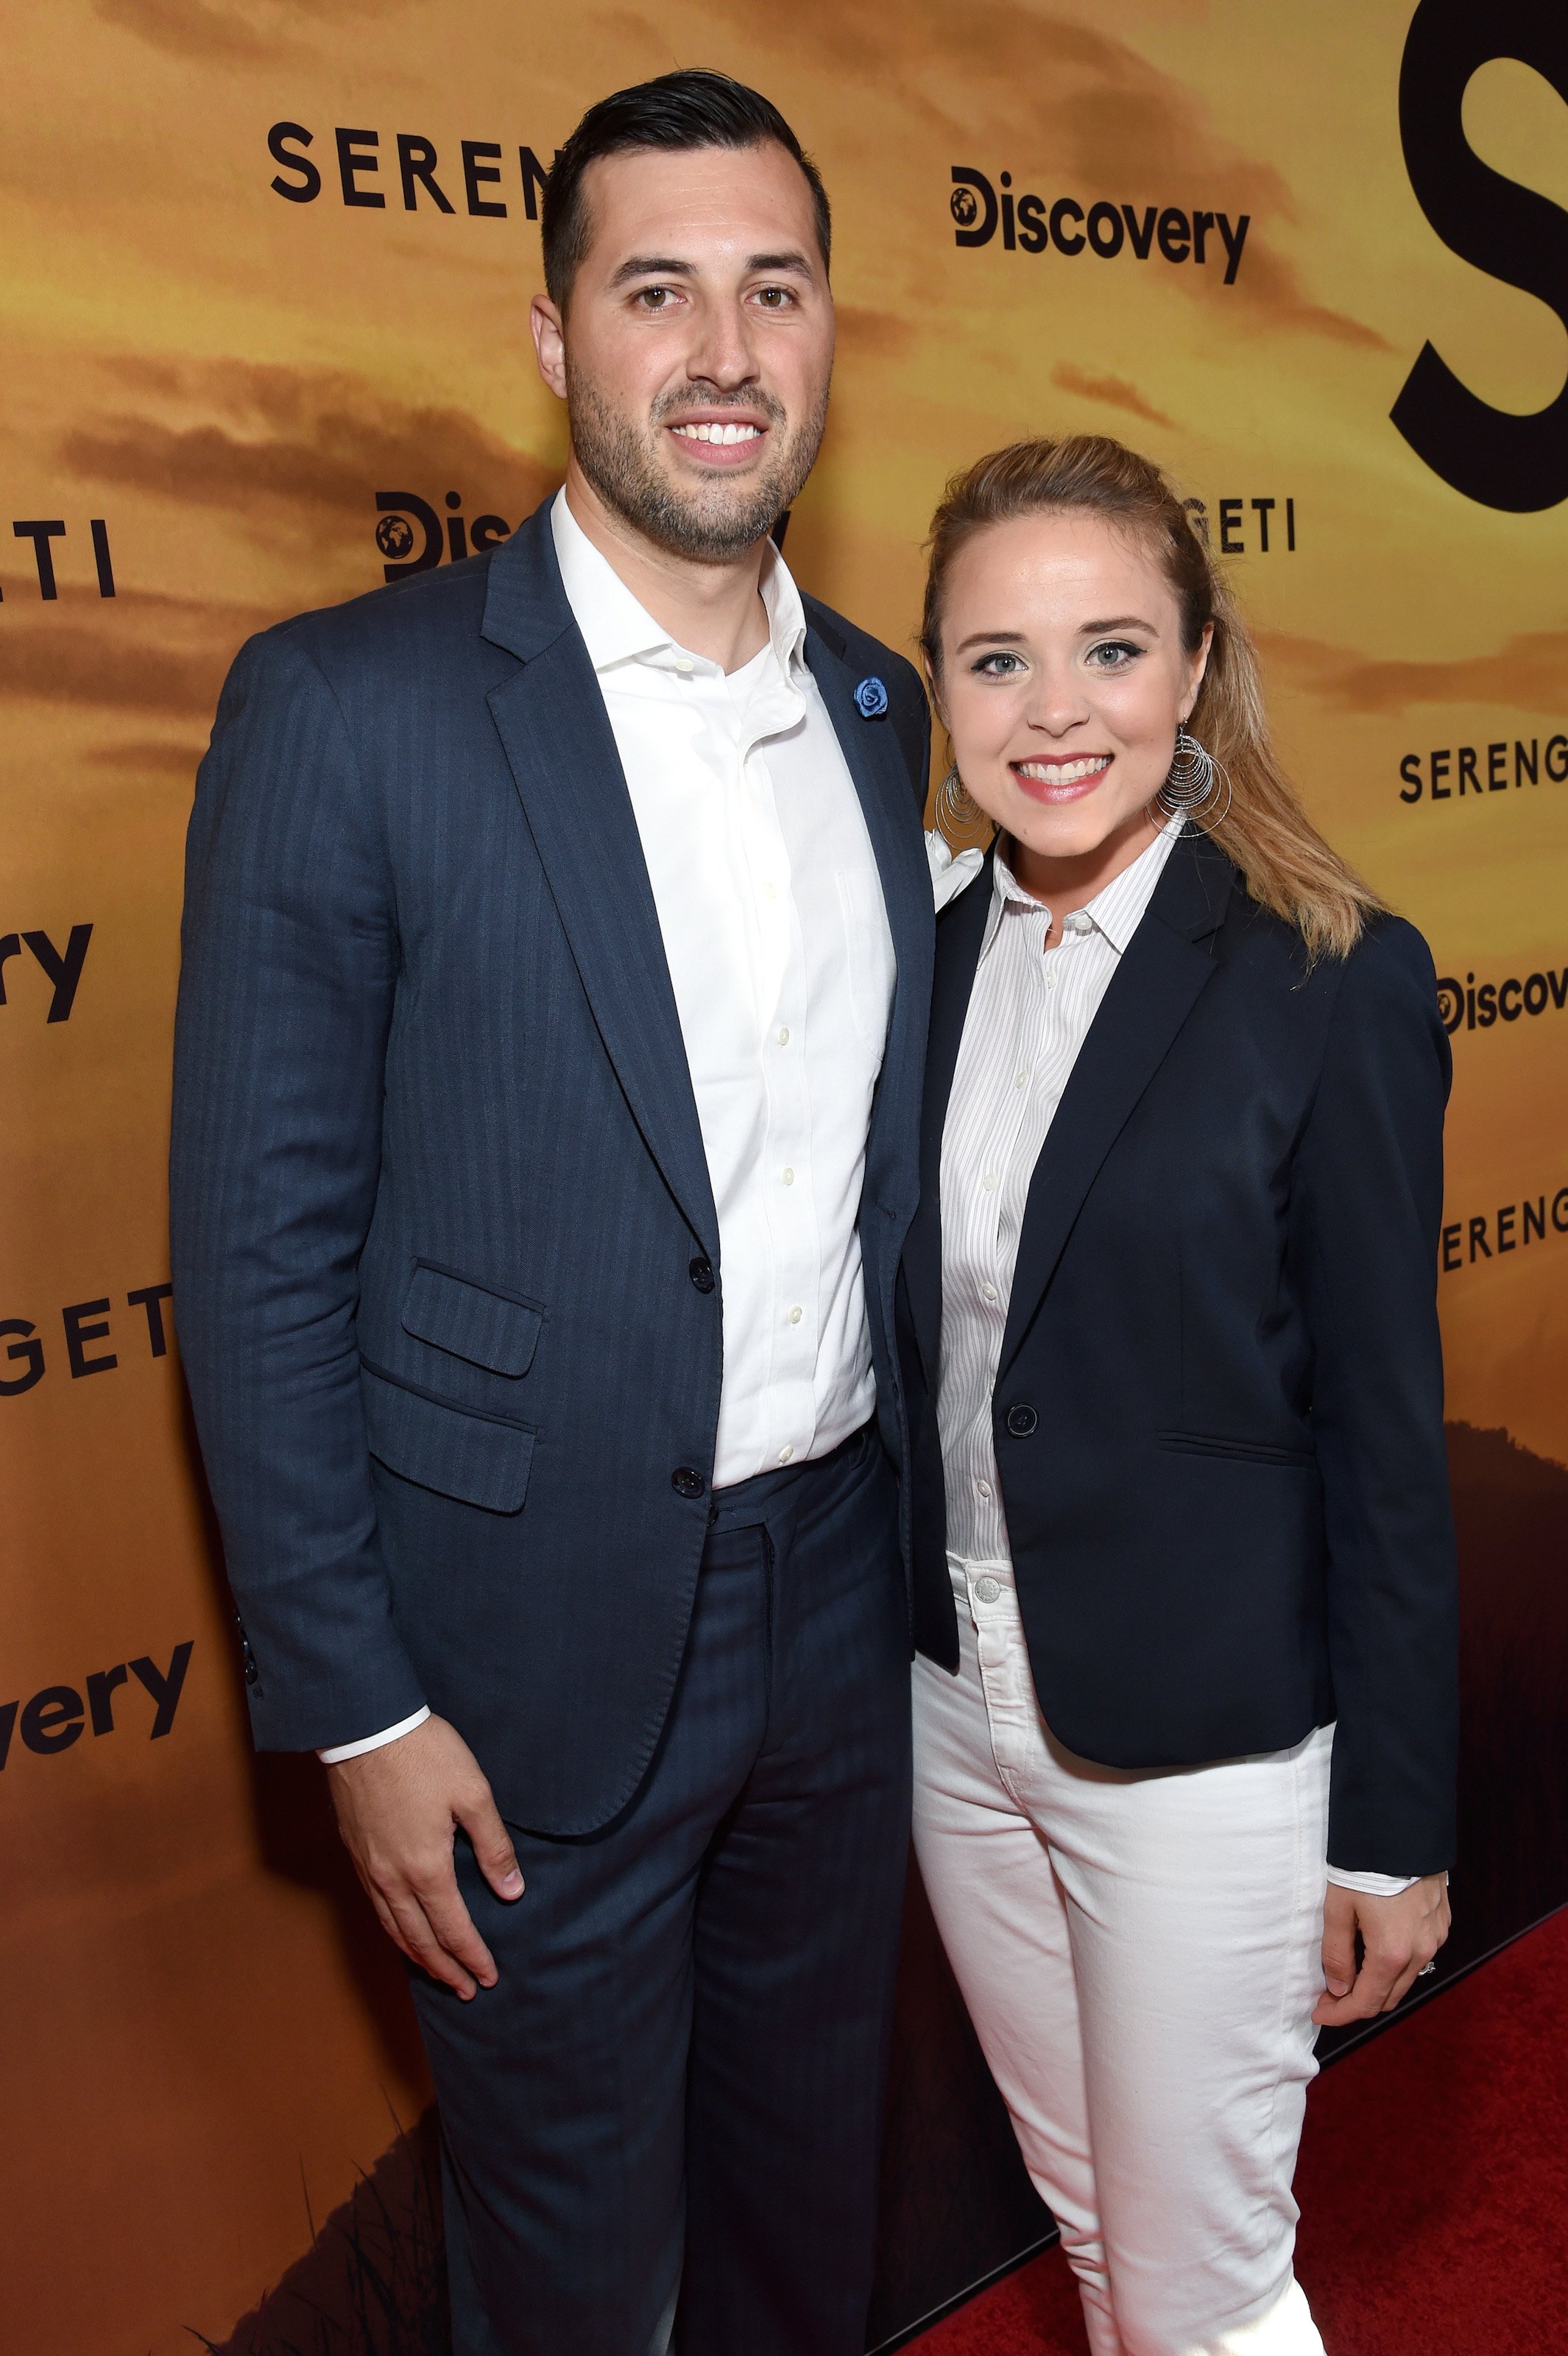  (L-R) Jeremy Vuolo and Jinger Duggar from the Duggar family standing next to each other and smiling at a movie premiere